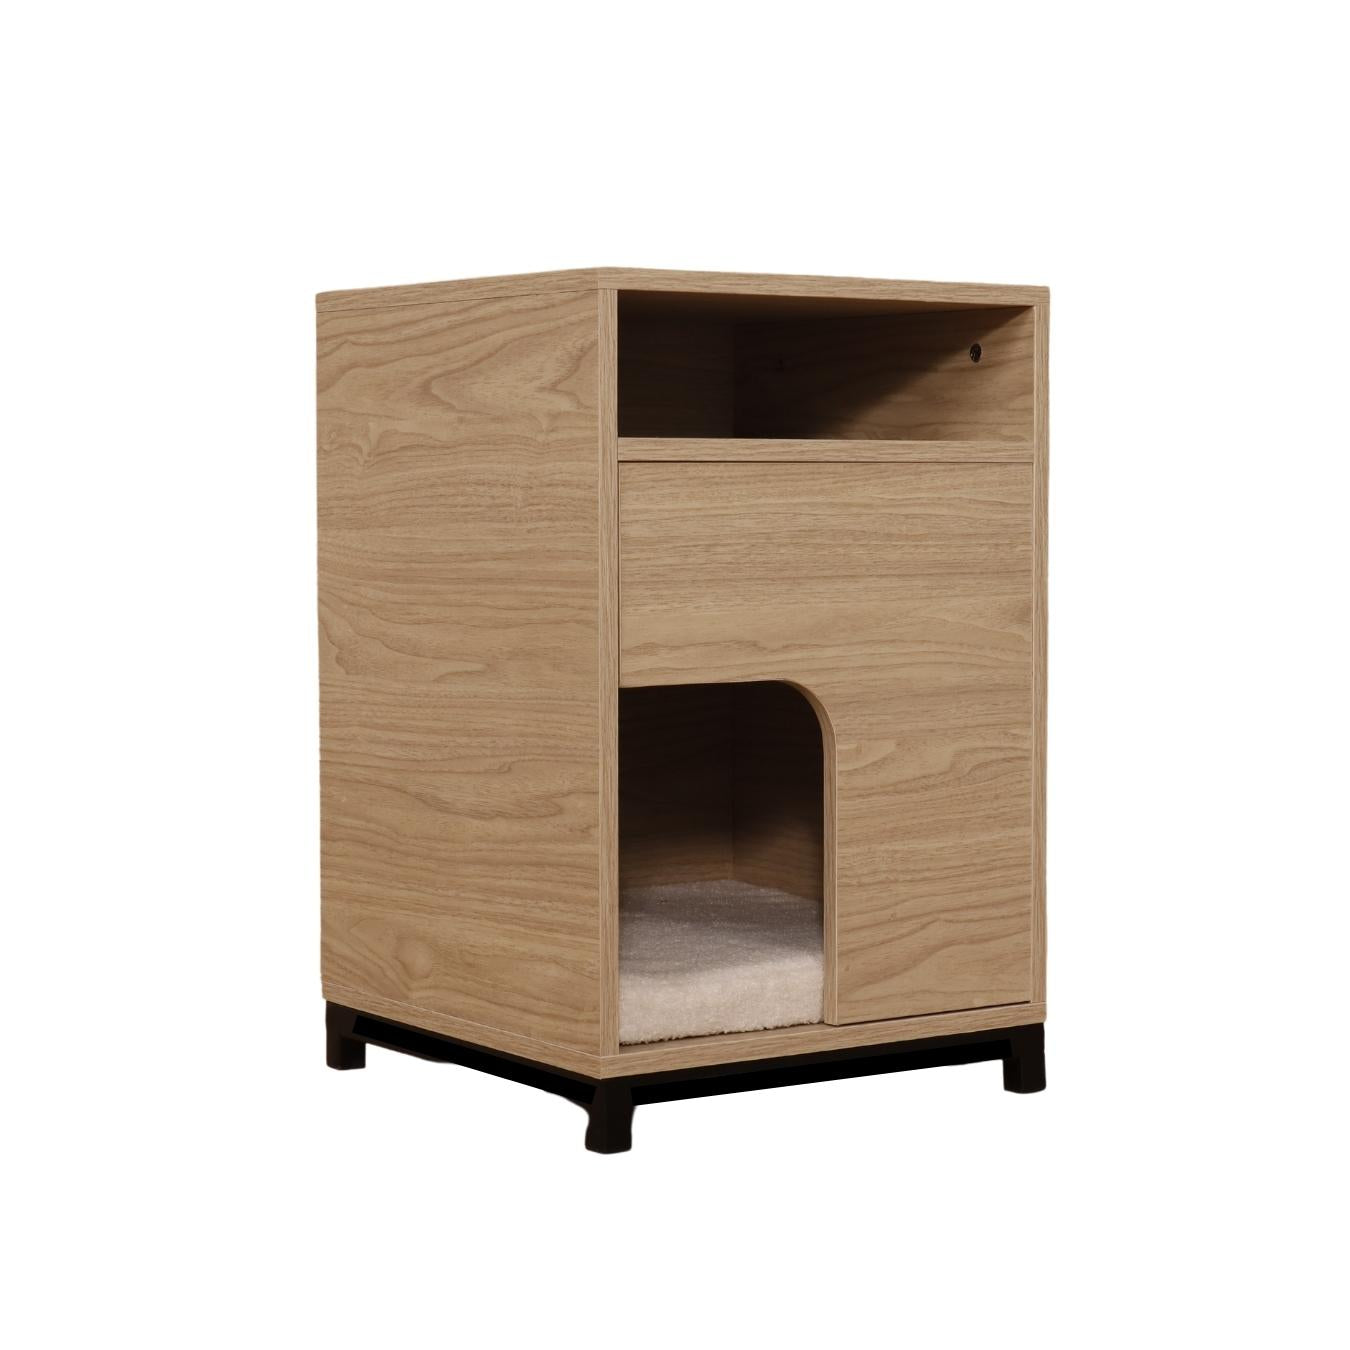 MADDY Pet Nook Side Table Mr. Chuck Pet Store